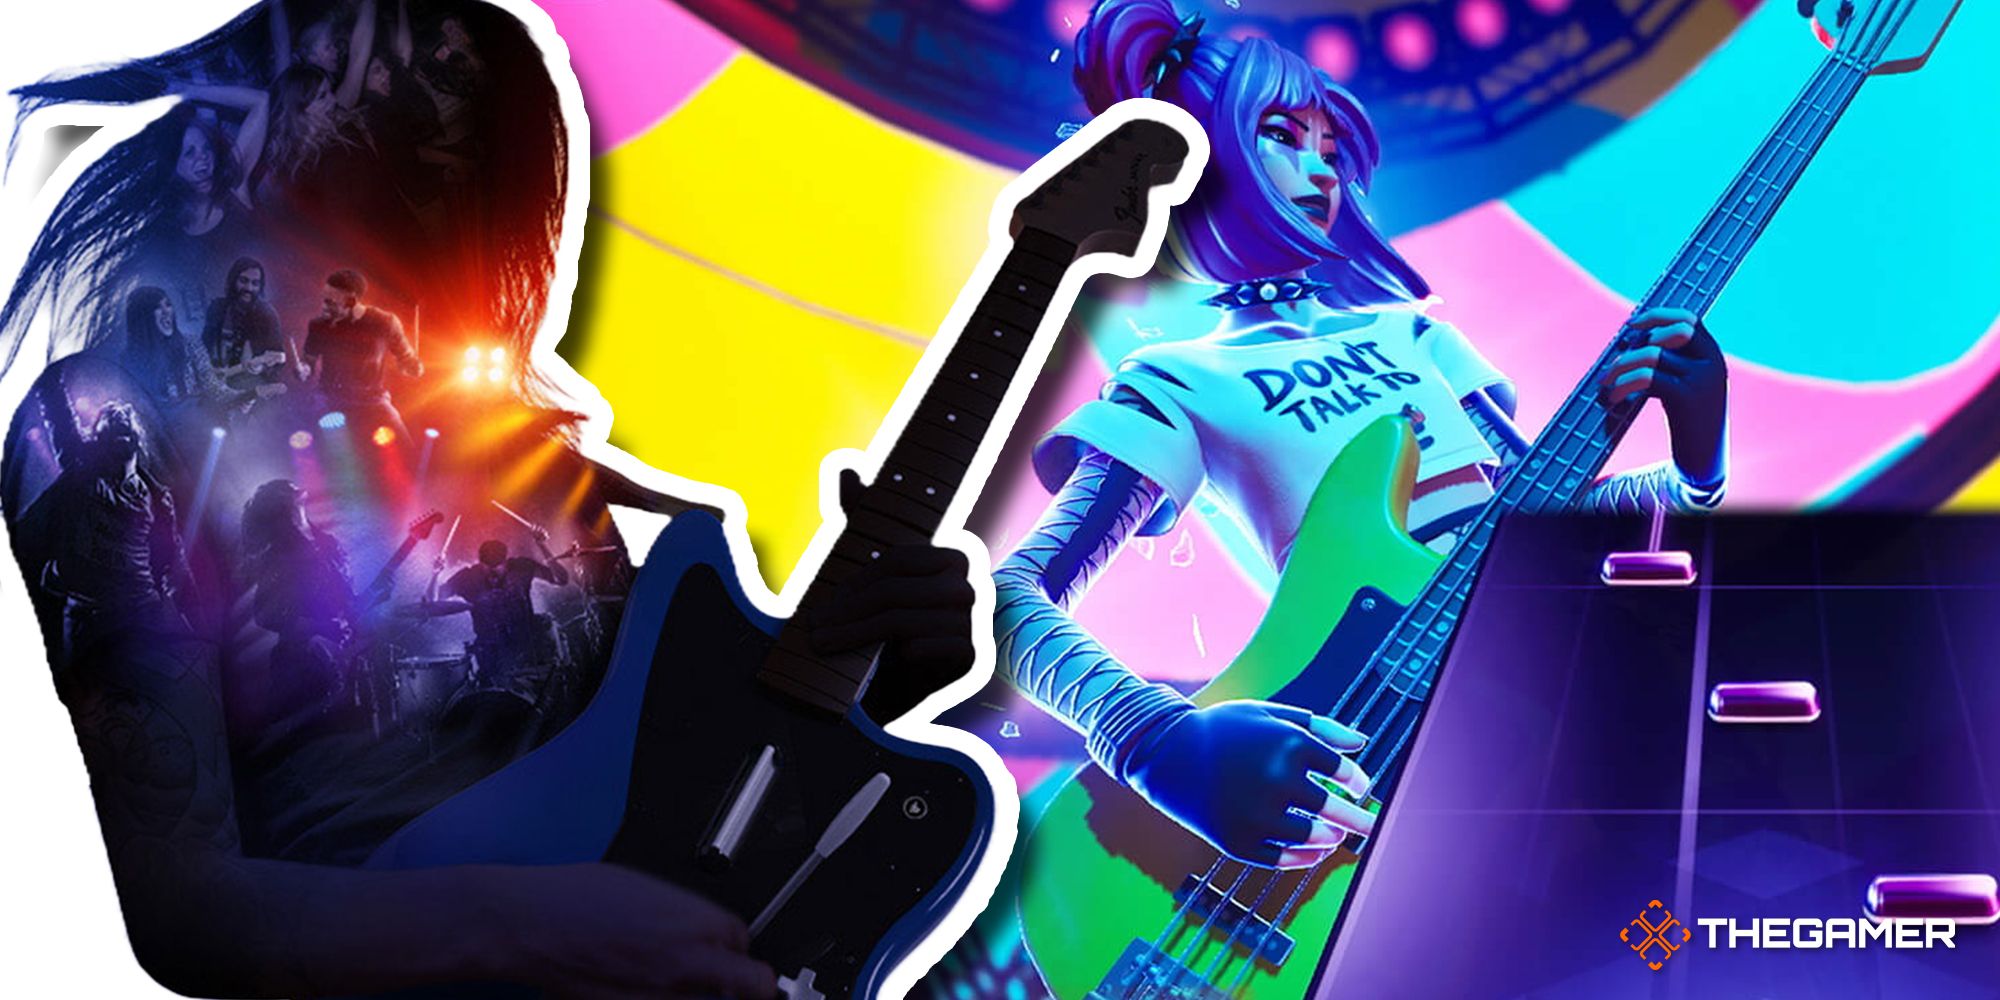 Fortnite Festival Brings Rock Band To A Whole New Generation